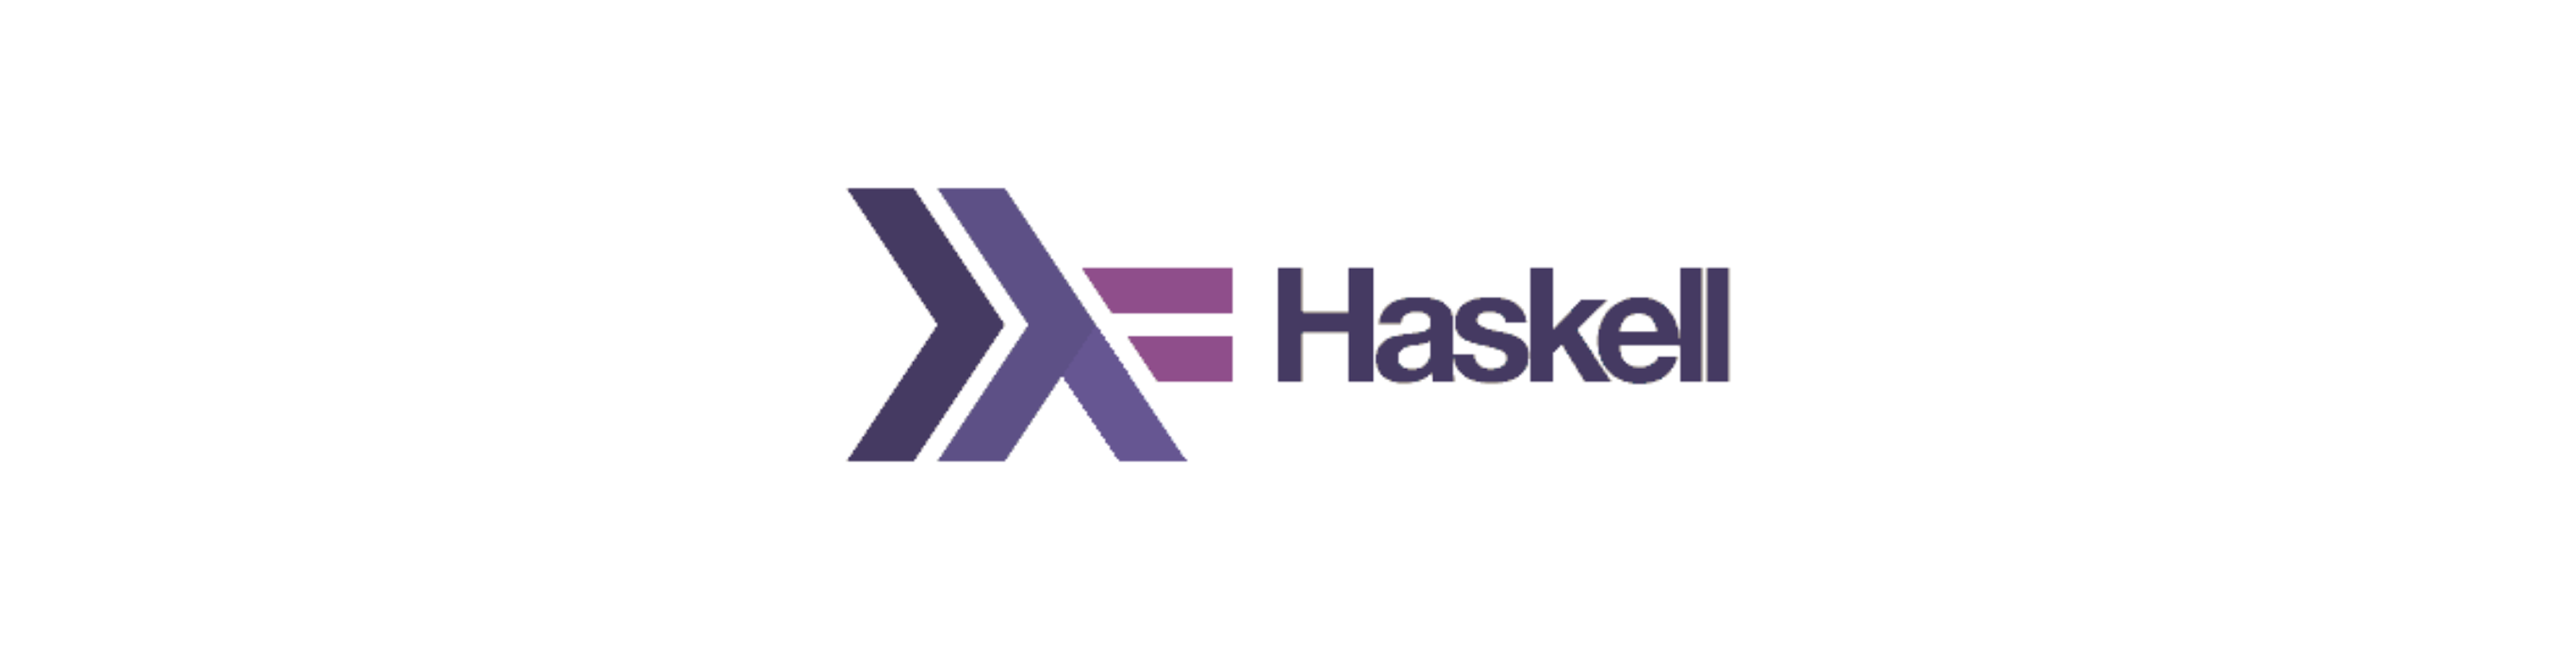 Haskell - Doomed to Succeed?